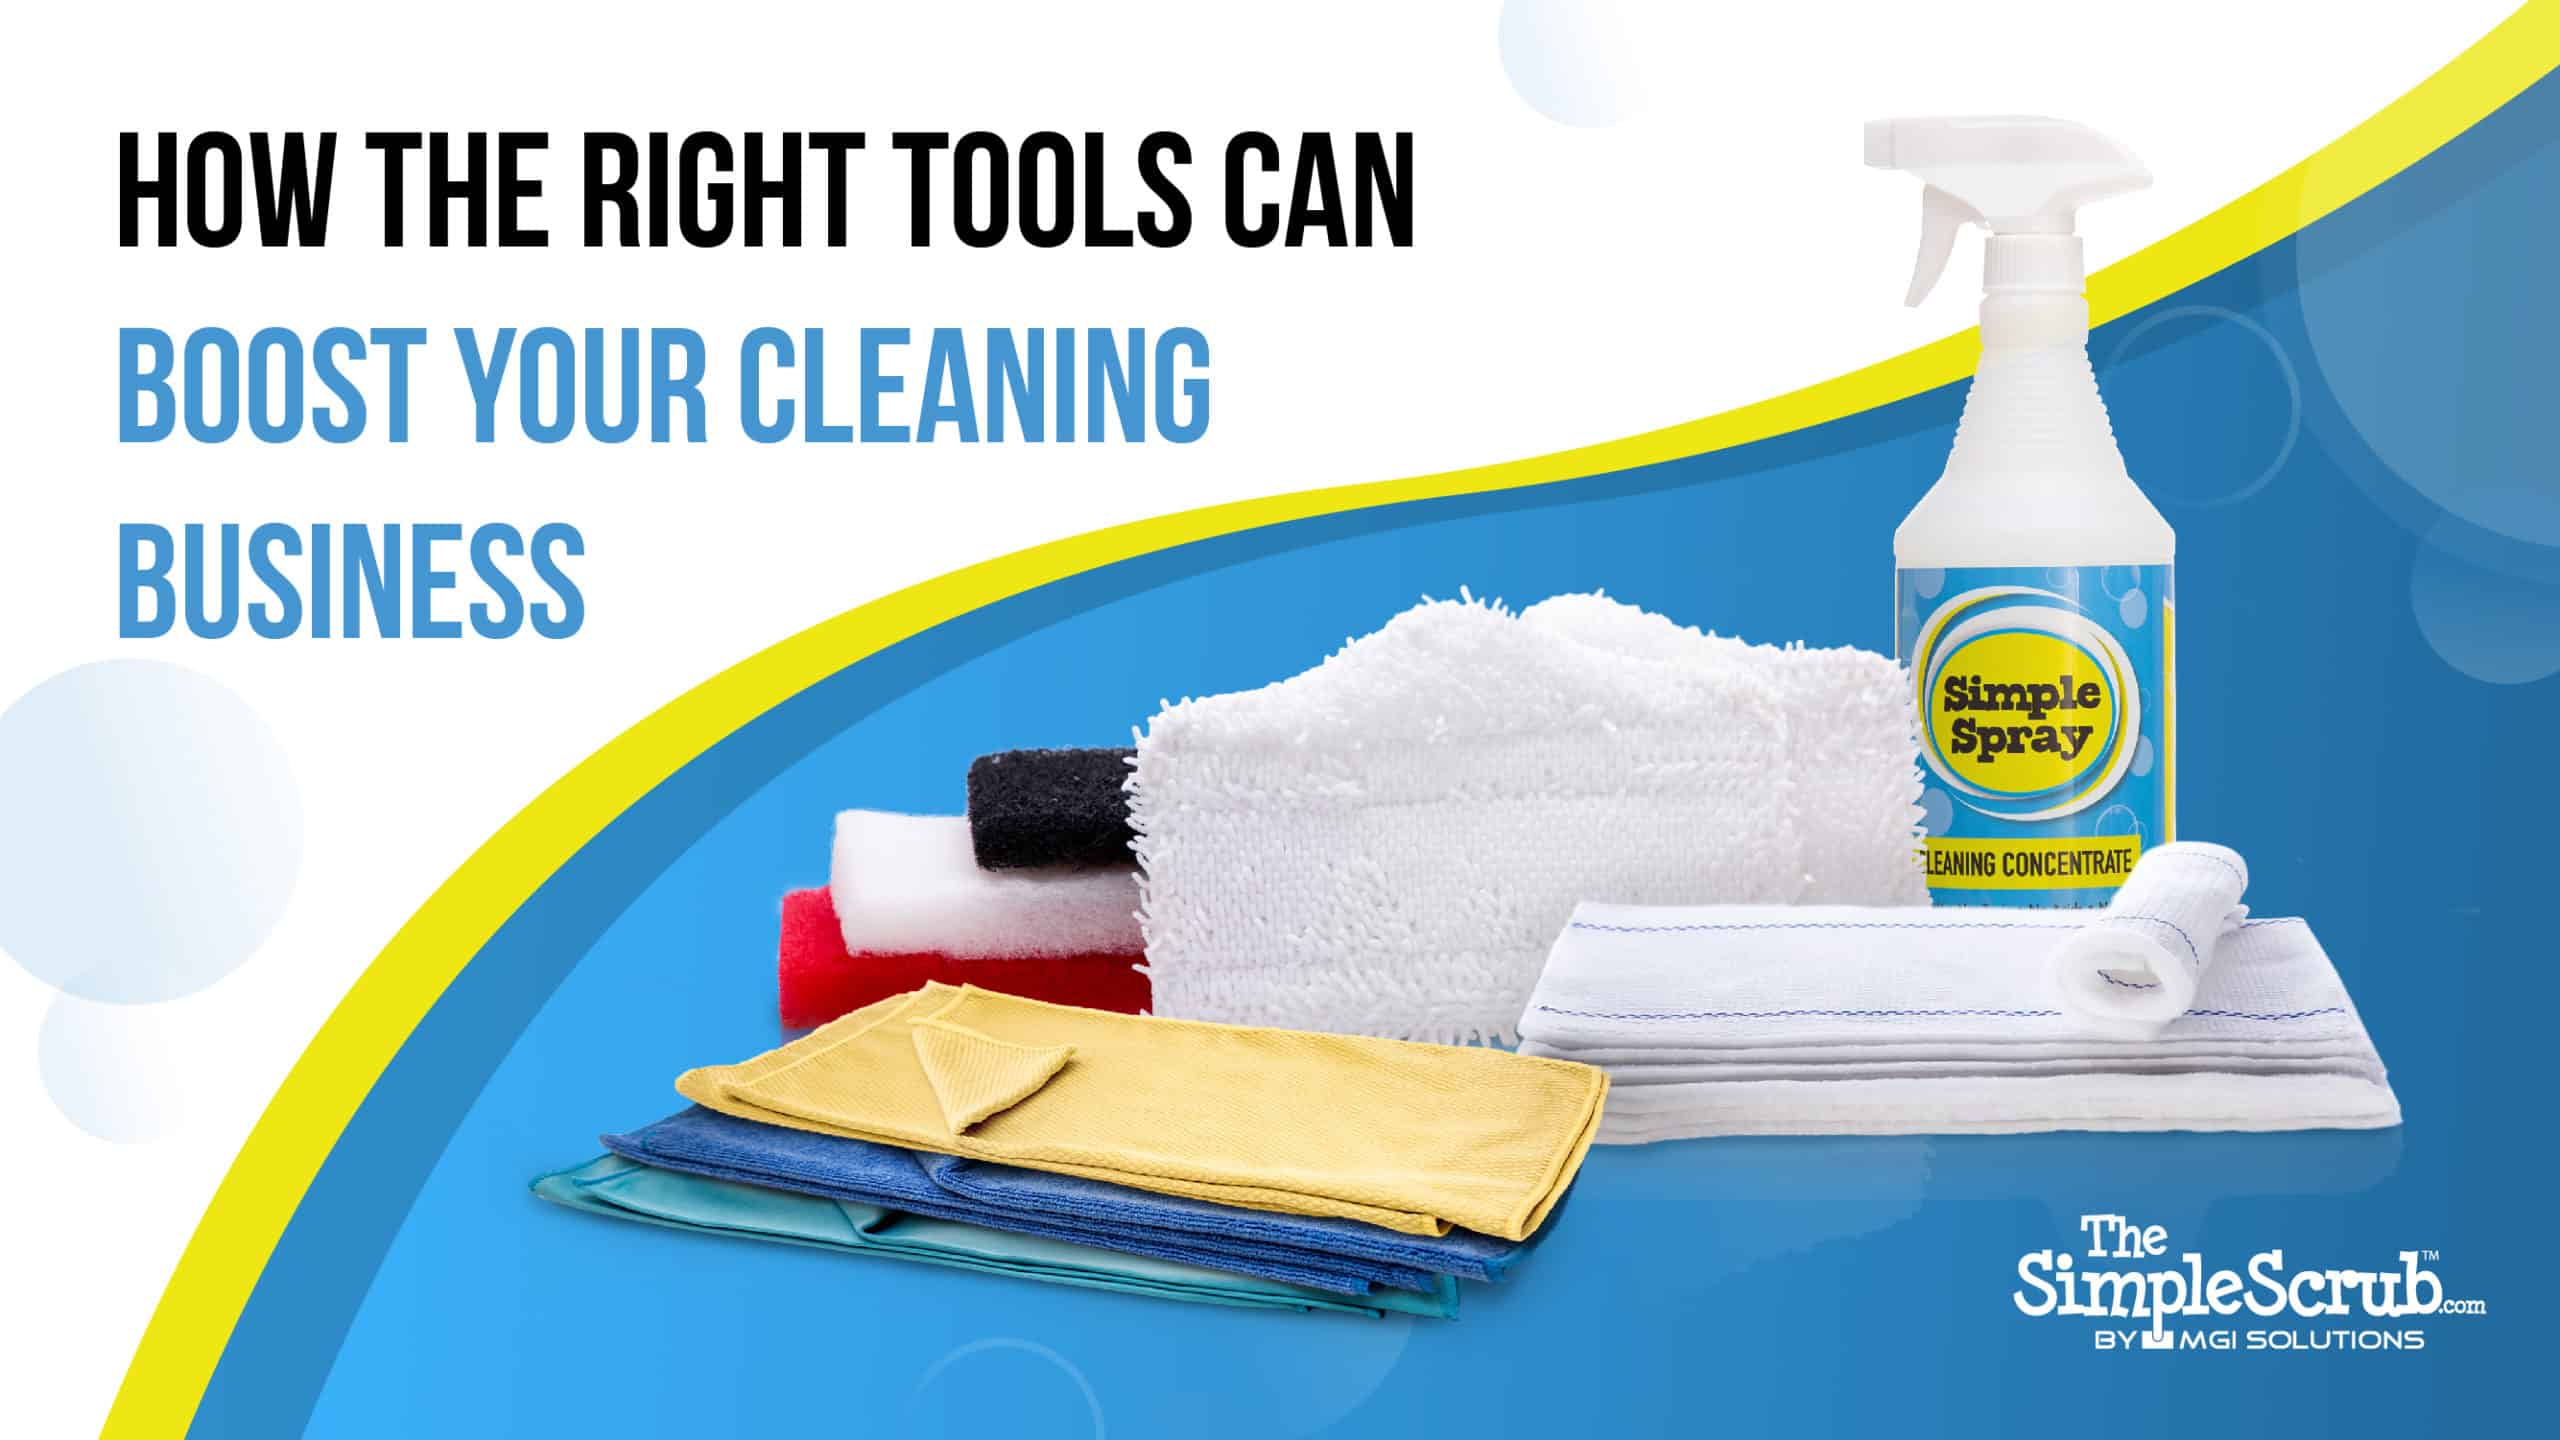 How the Right Tools Can Boost Your Cleaning Business featured image